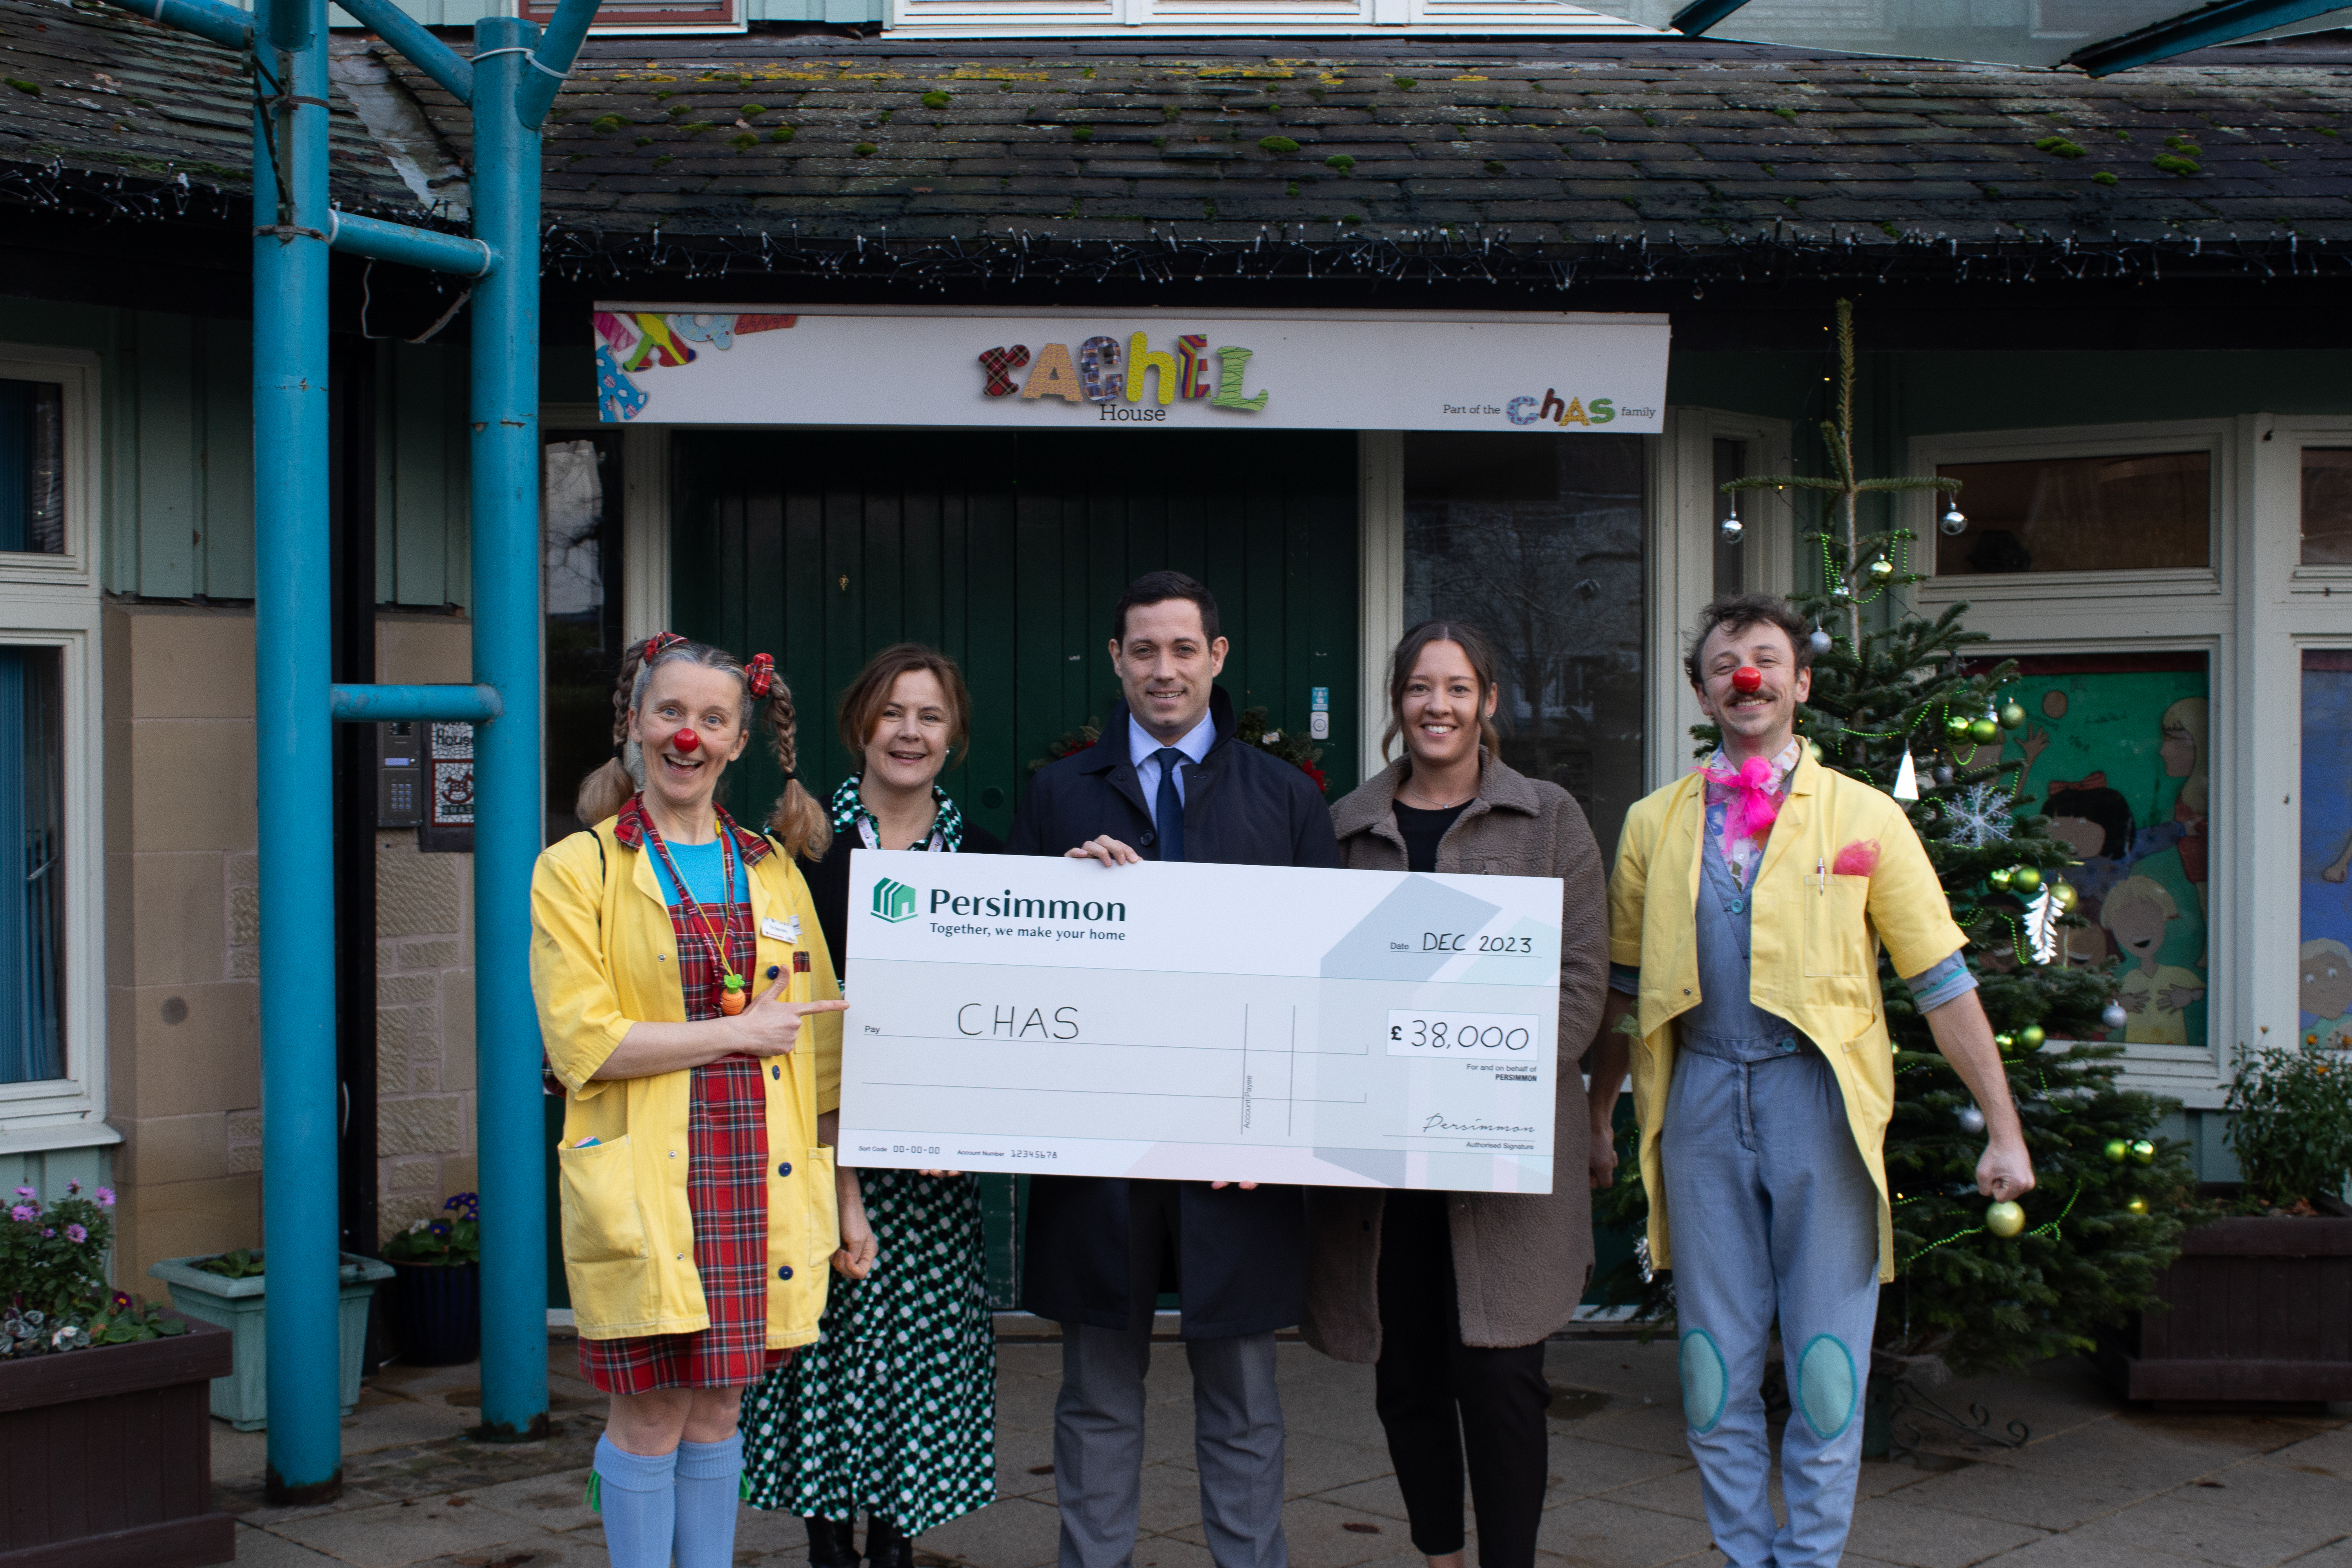 Persimmon spreads Christmas cheer with charity of the year cheque to CHAS